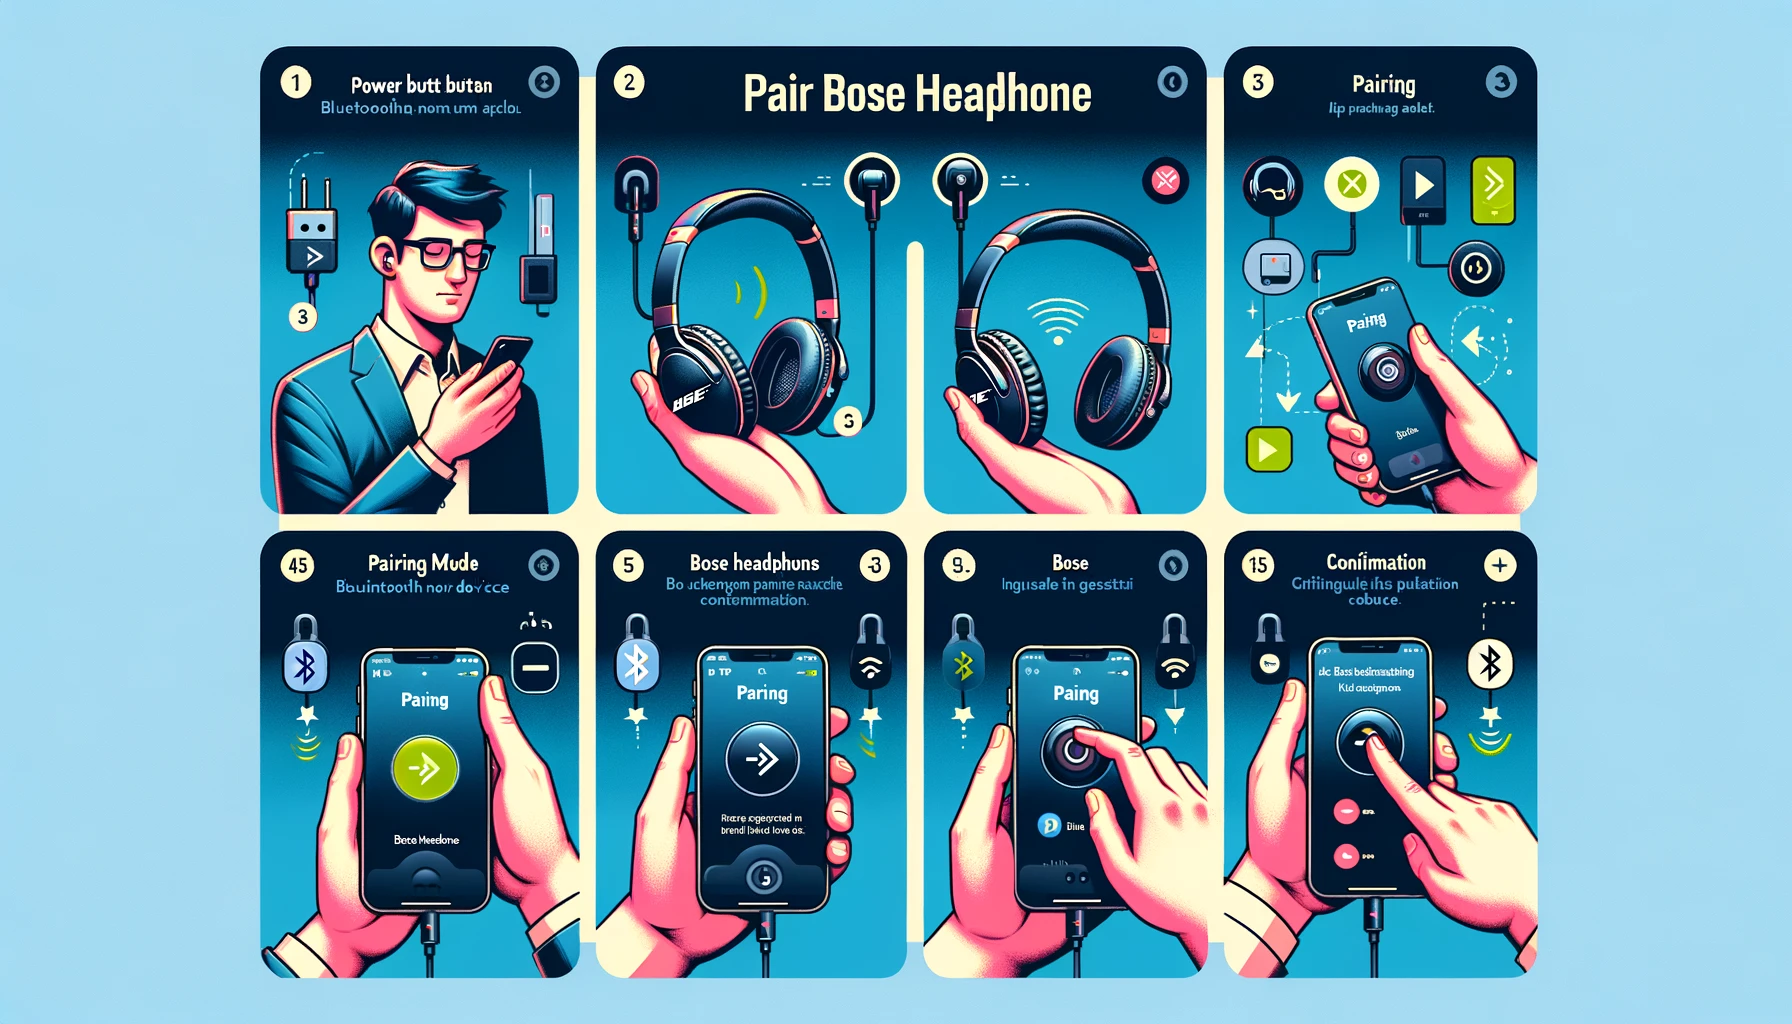 How to Pair Bose Headphones? A Step-By-Step Guide!